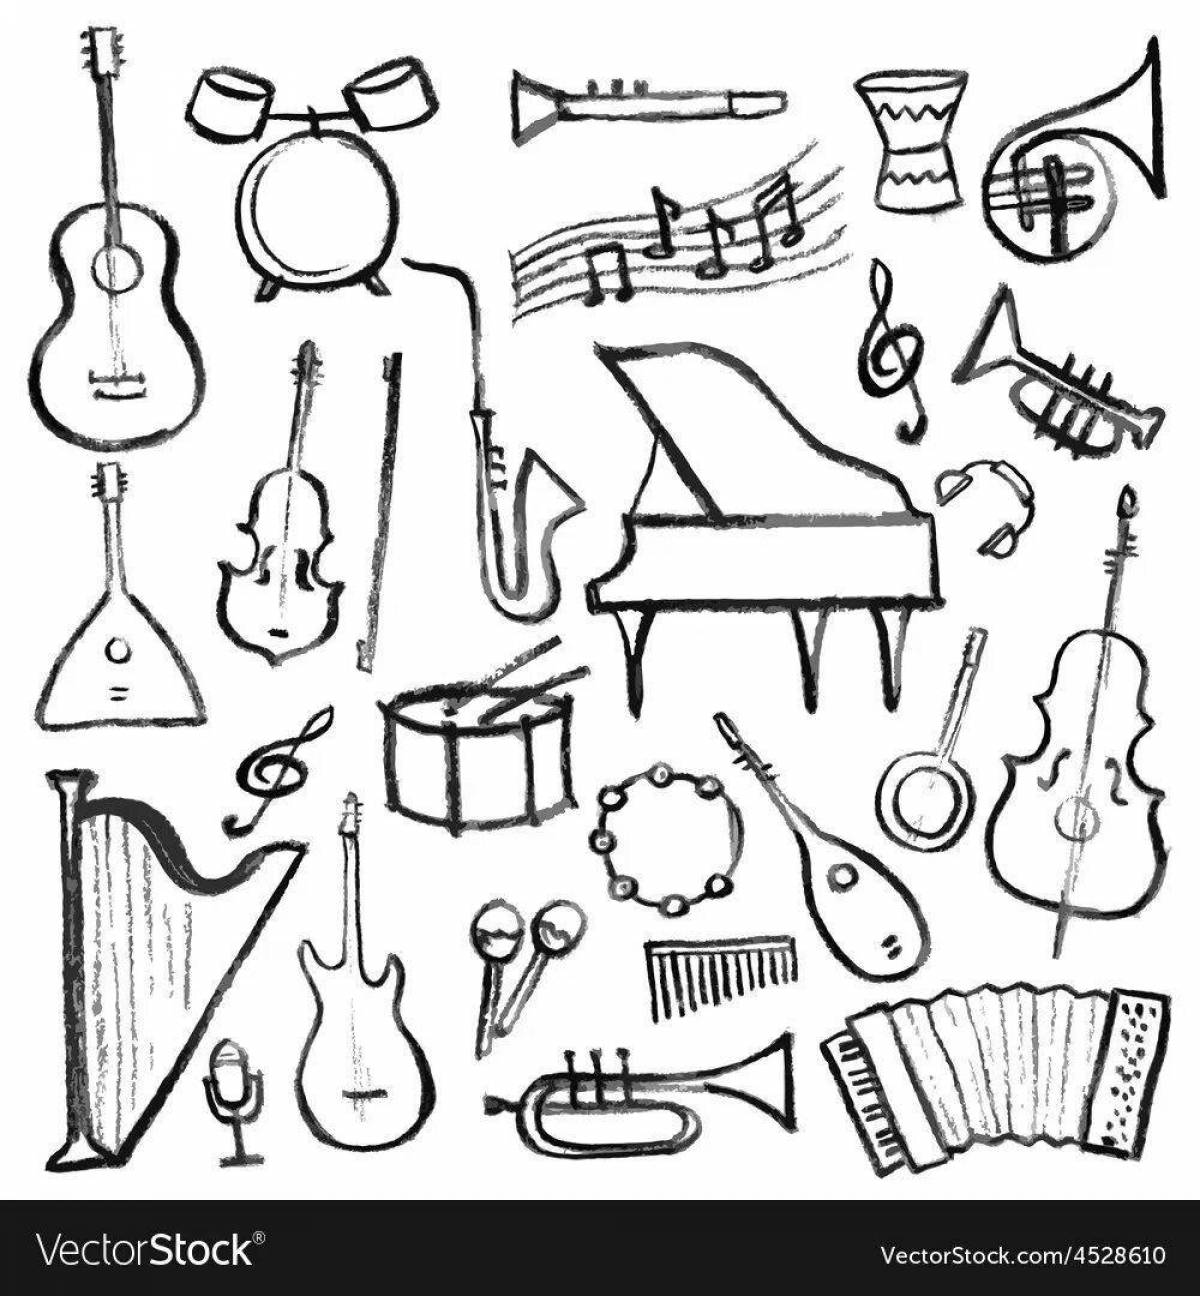 A fun coloring book of folk musical instruments for kids